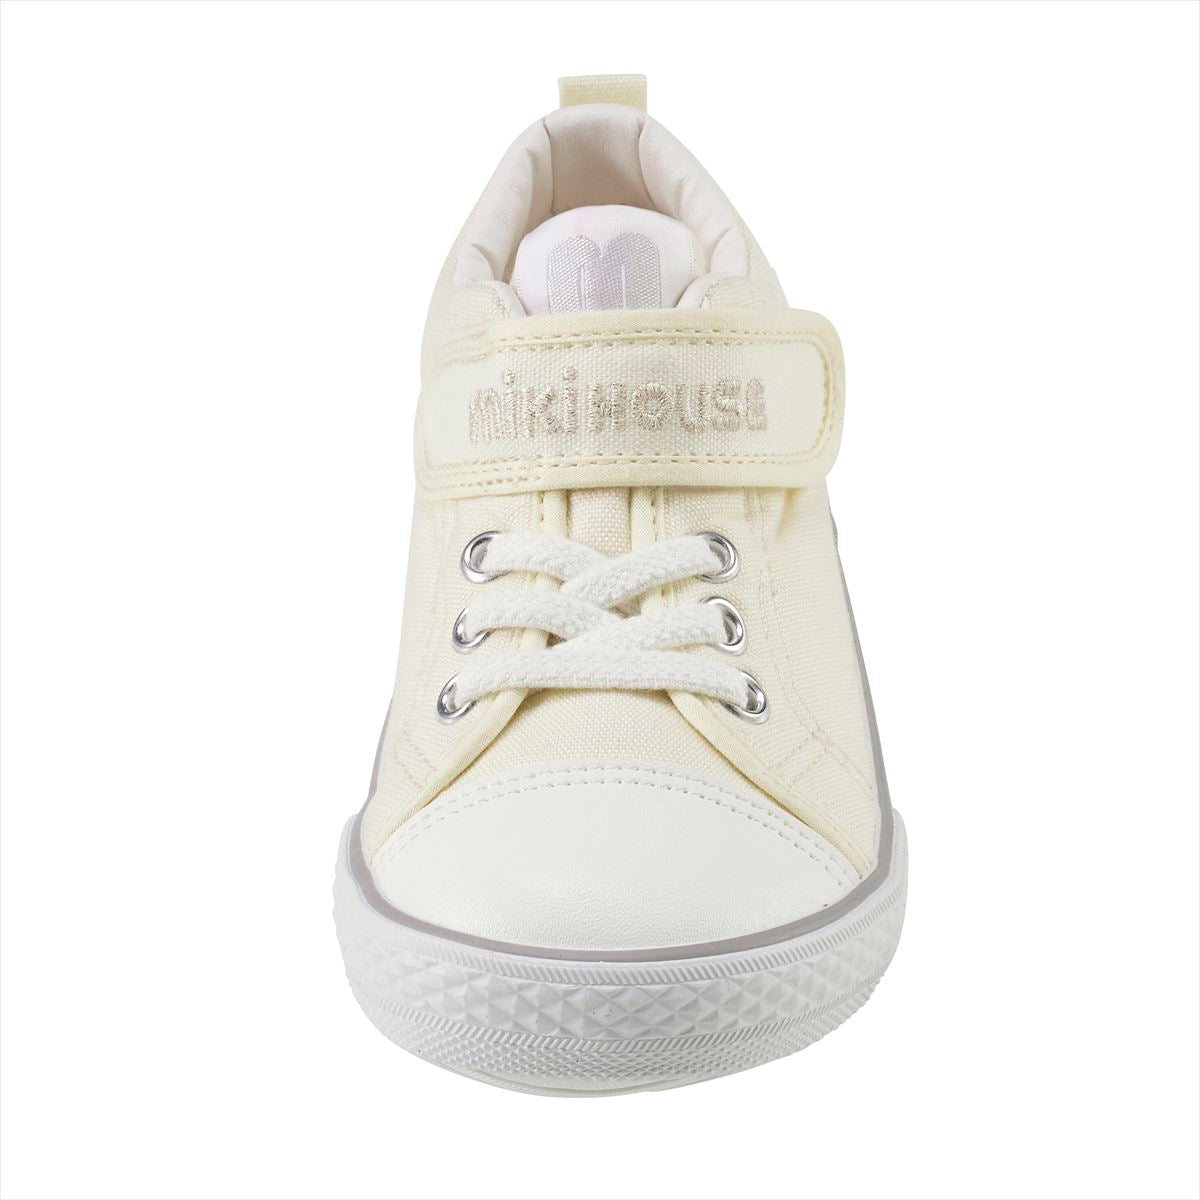 New! Classic Low Top Kids’ Shoes